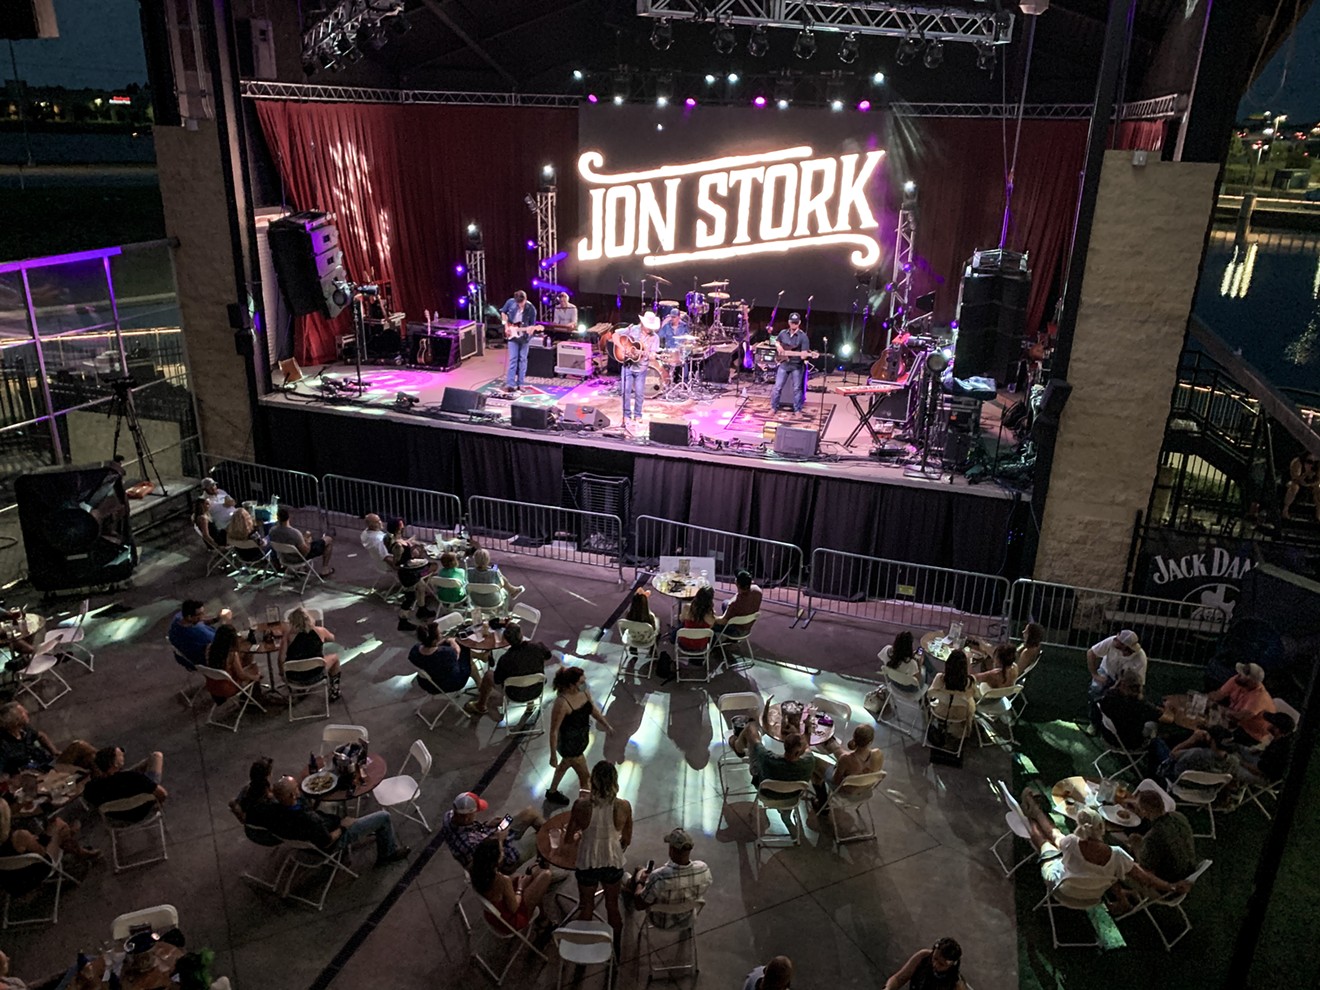 Dinner and a show: Socially distanced concertgoers watch Jon Stork perform at Lava Cantina Saturday August 15.